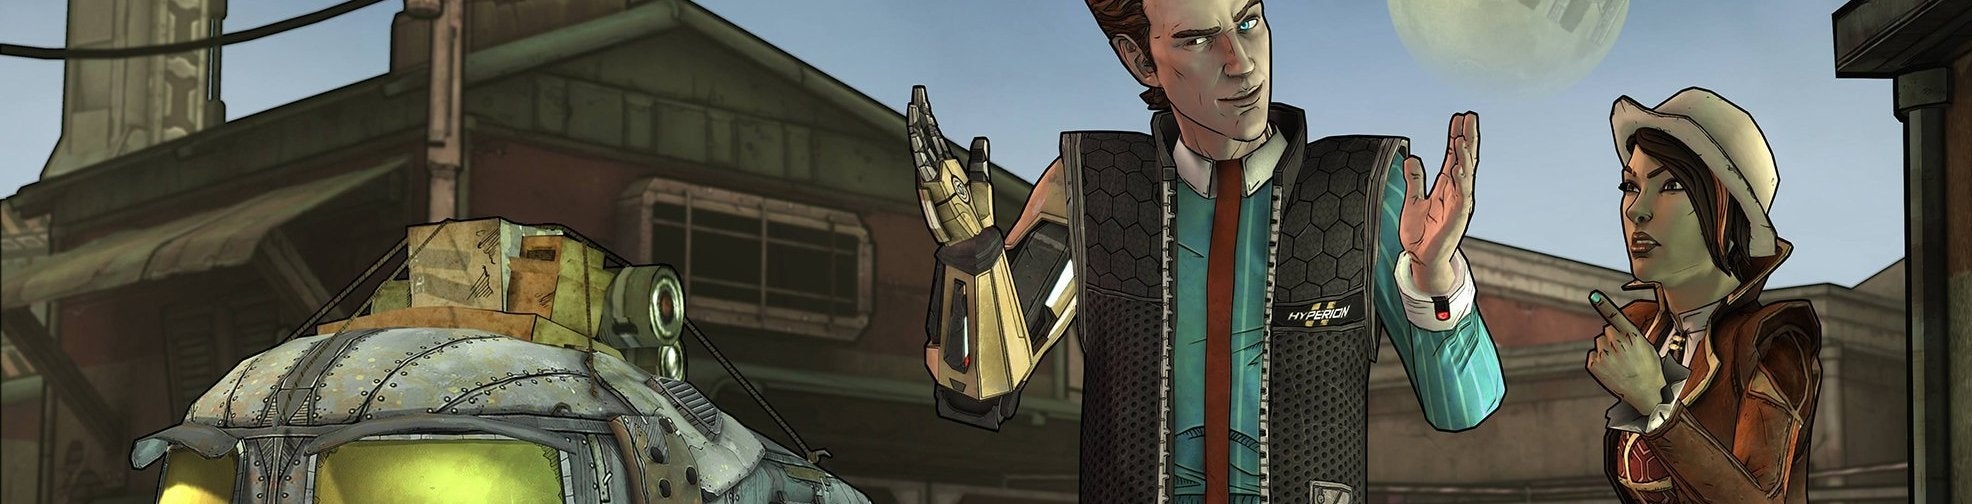 Image for Tales from the Borderlands: Episode 1 review